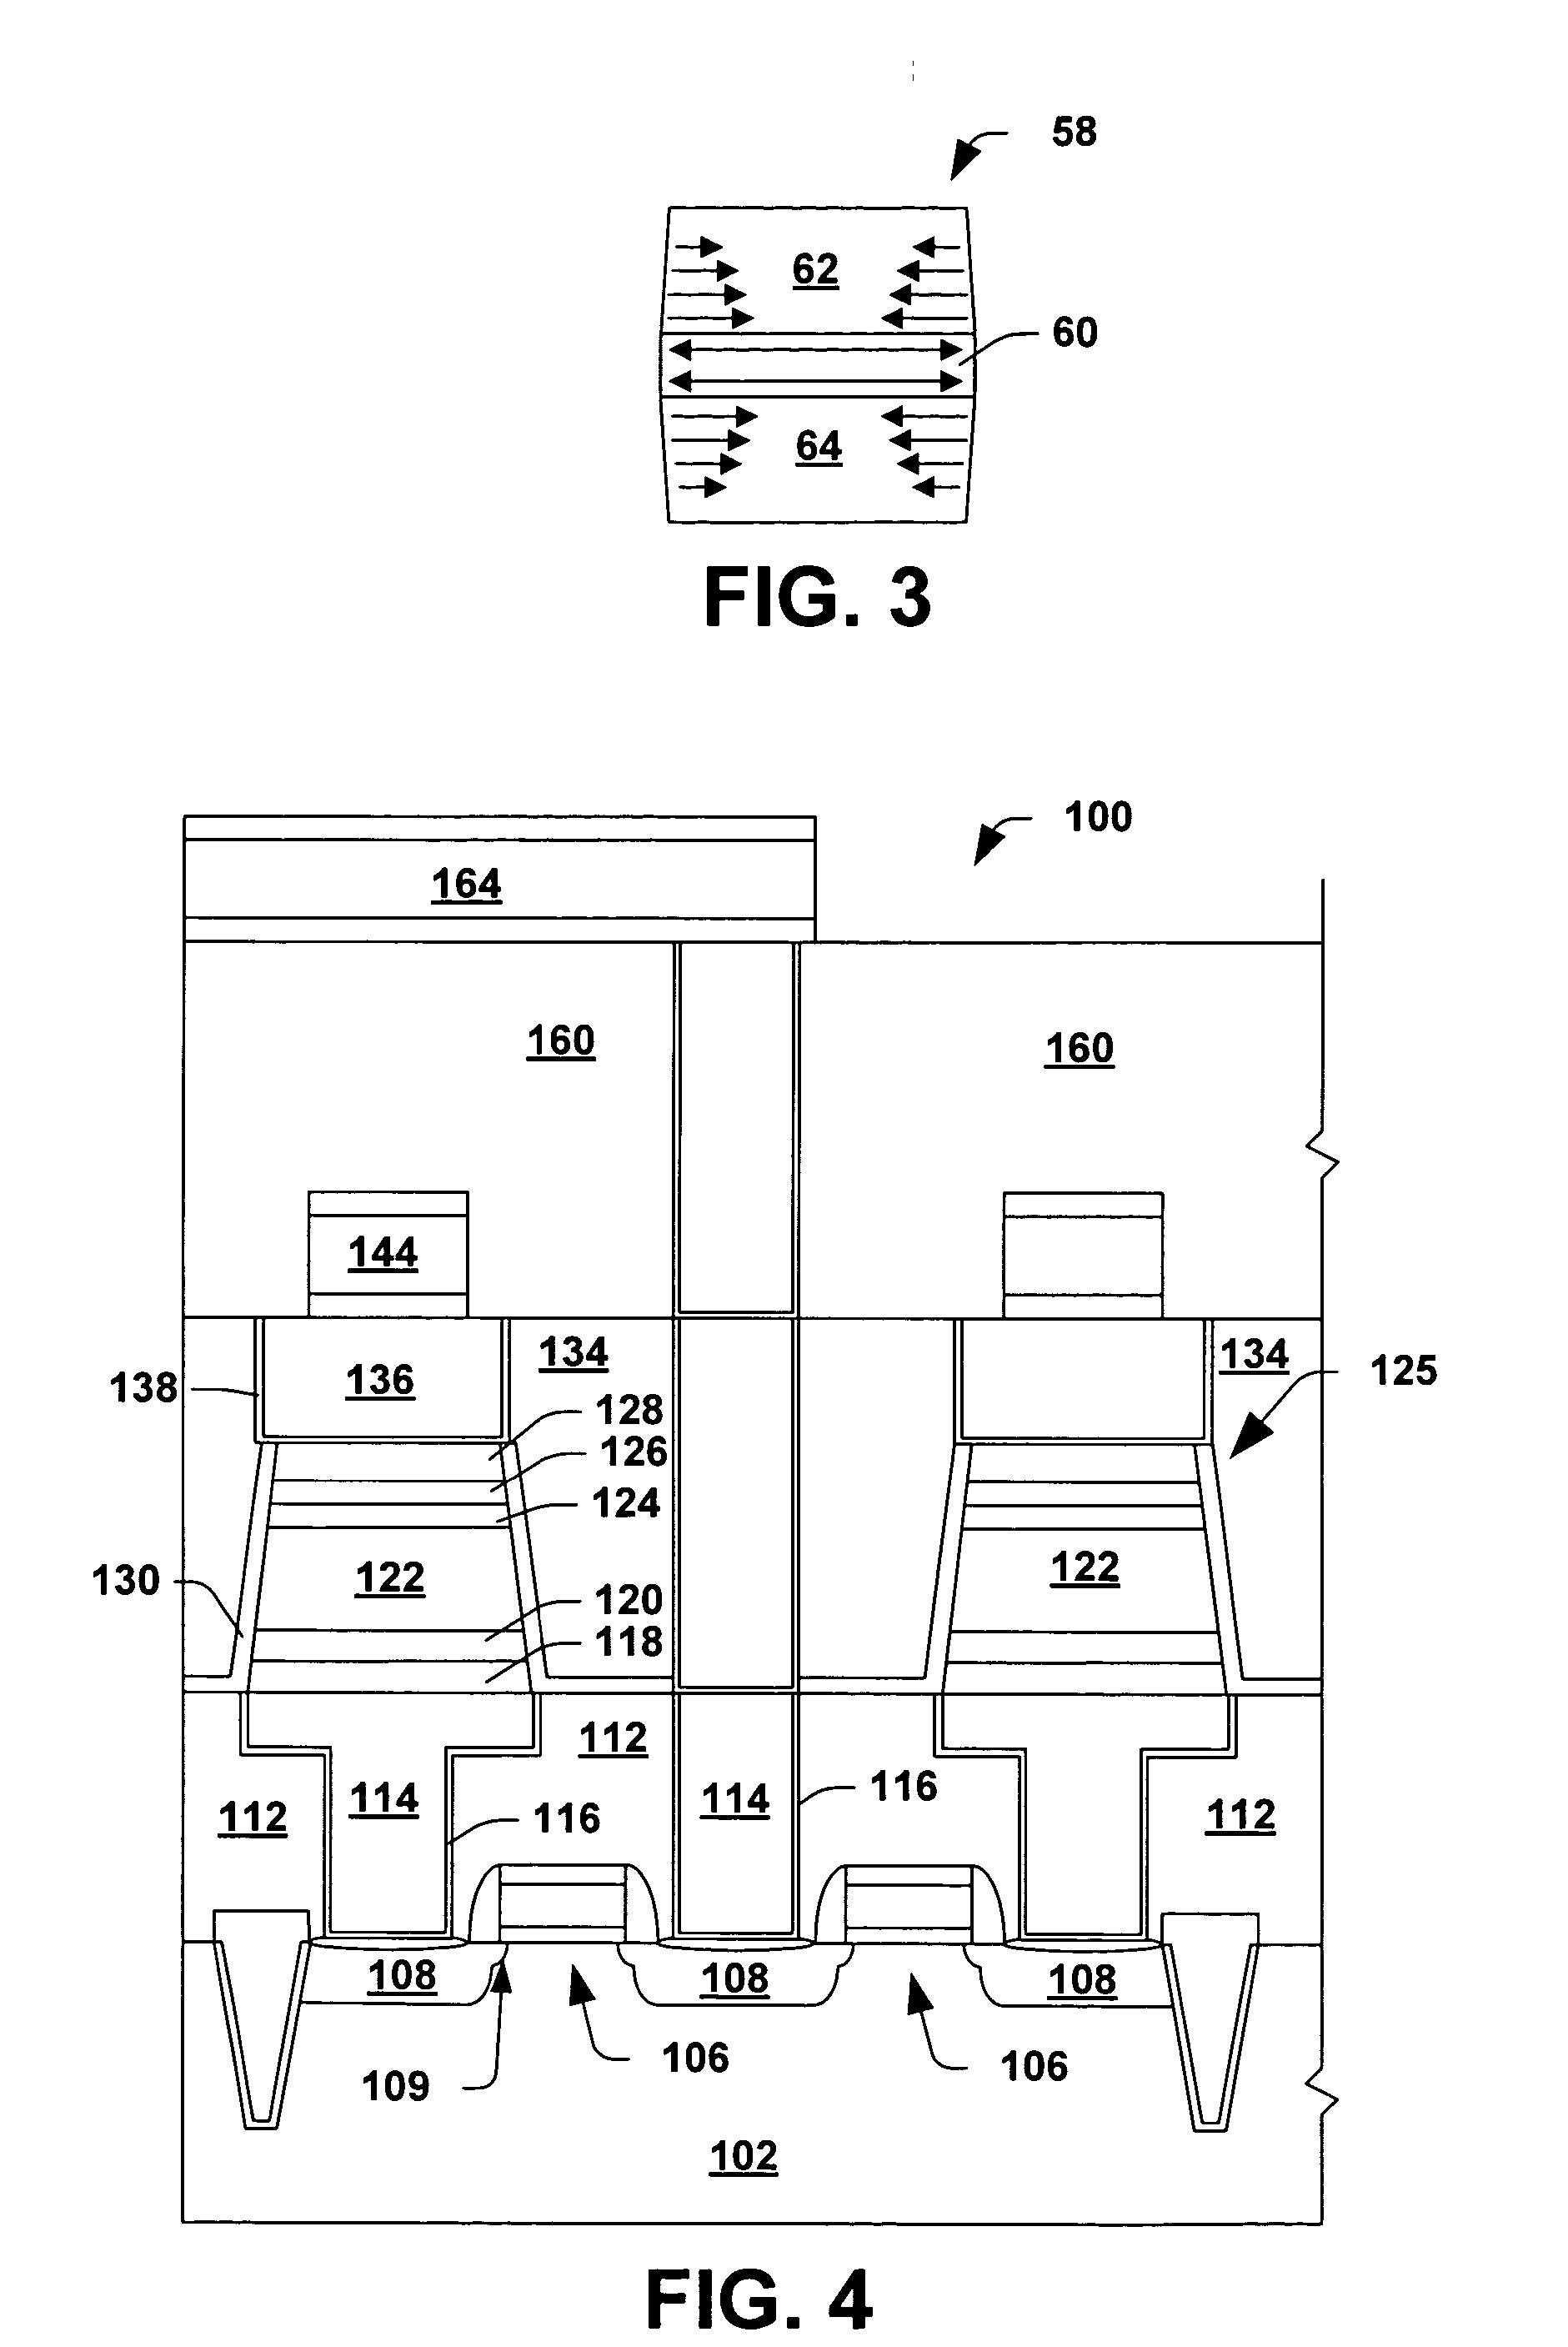 High polarization ferroelectric capacitors for integrated circuits